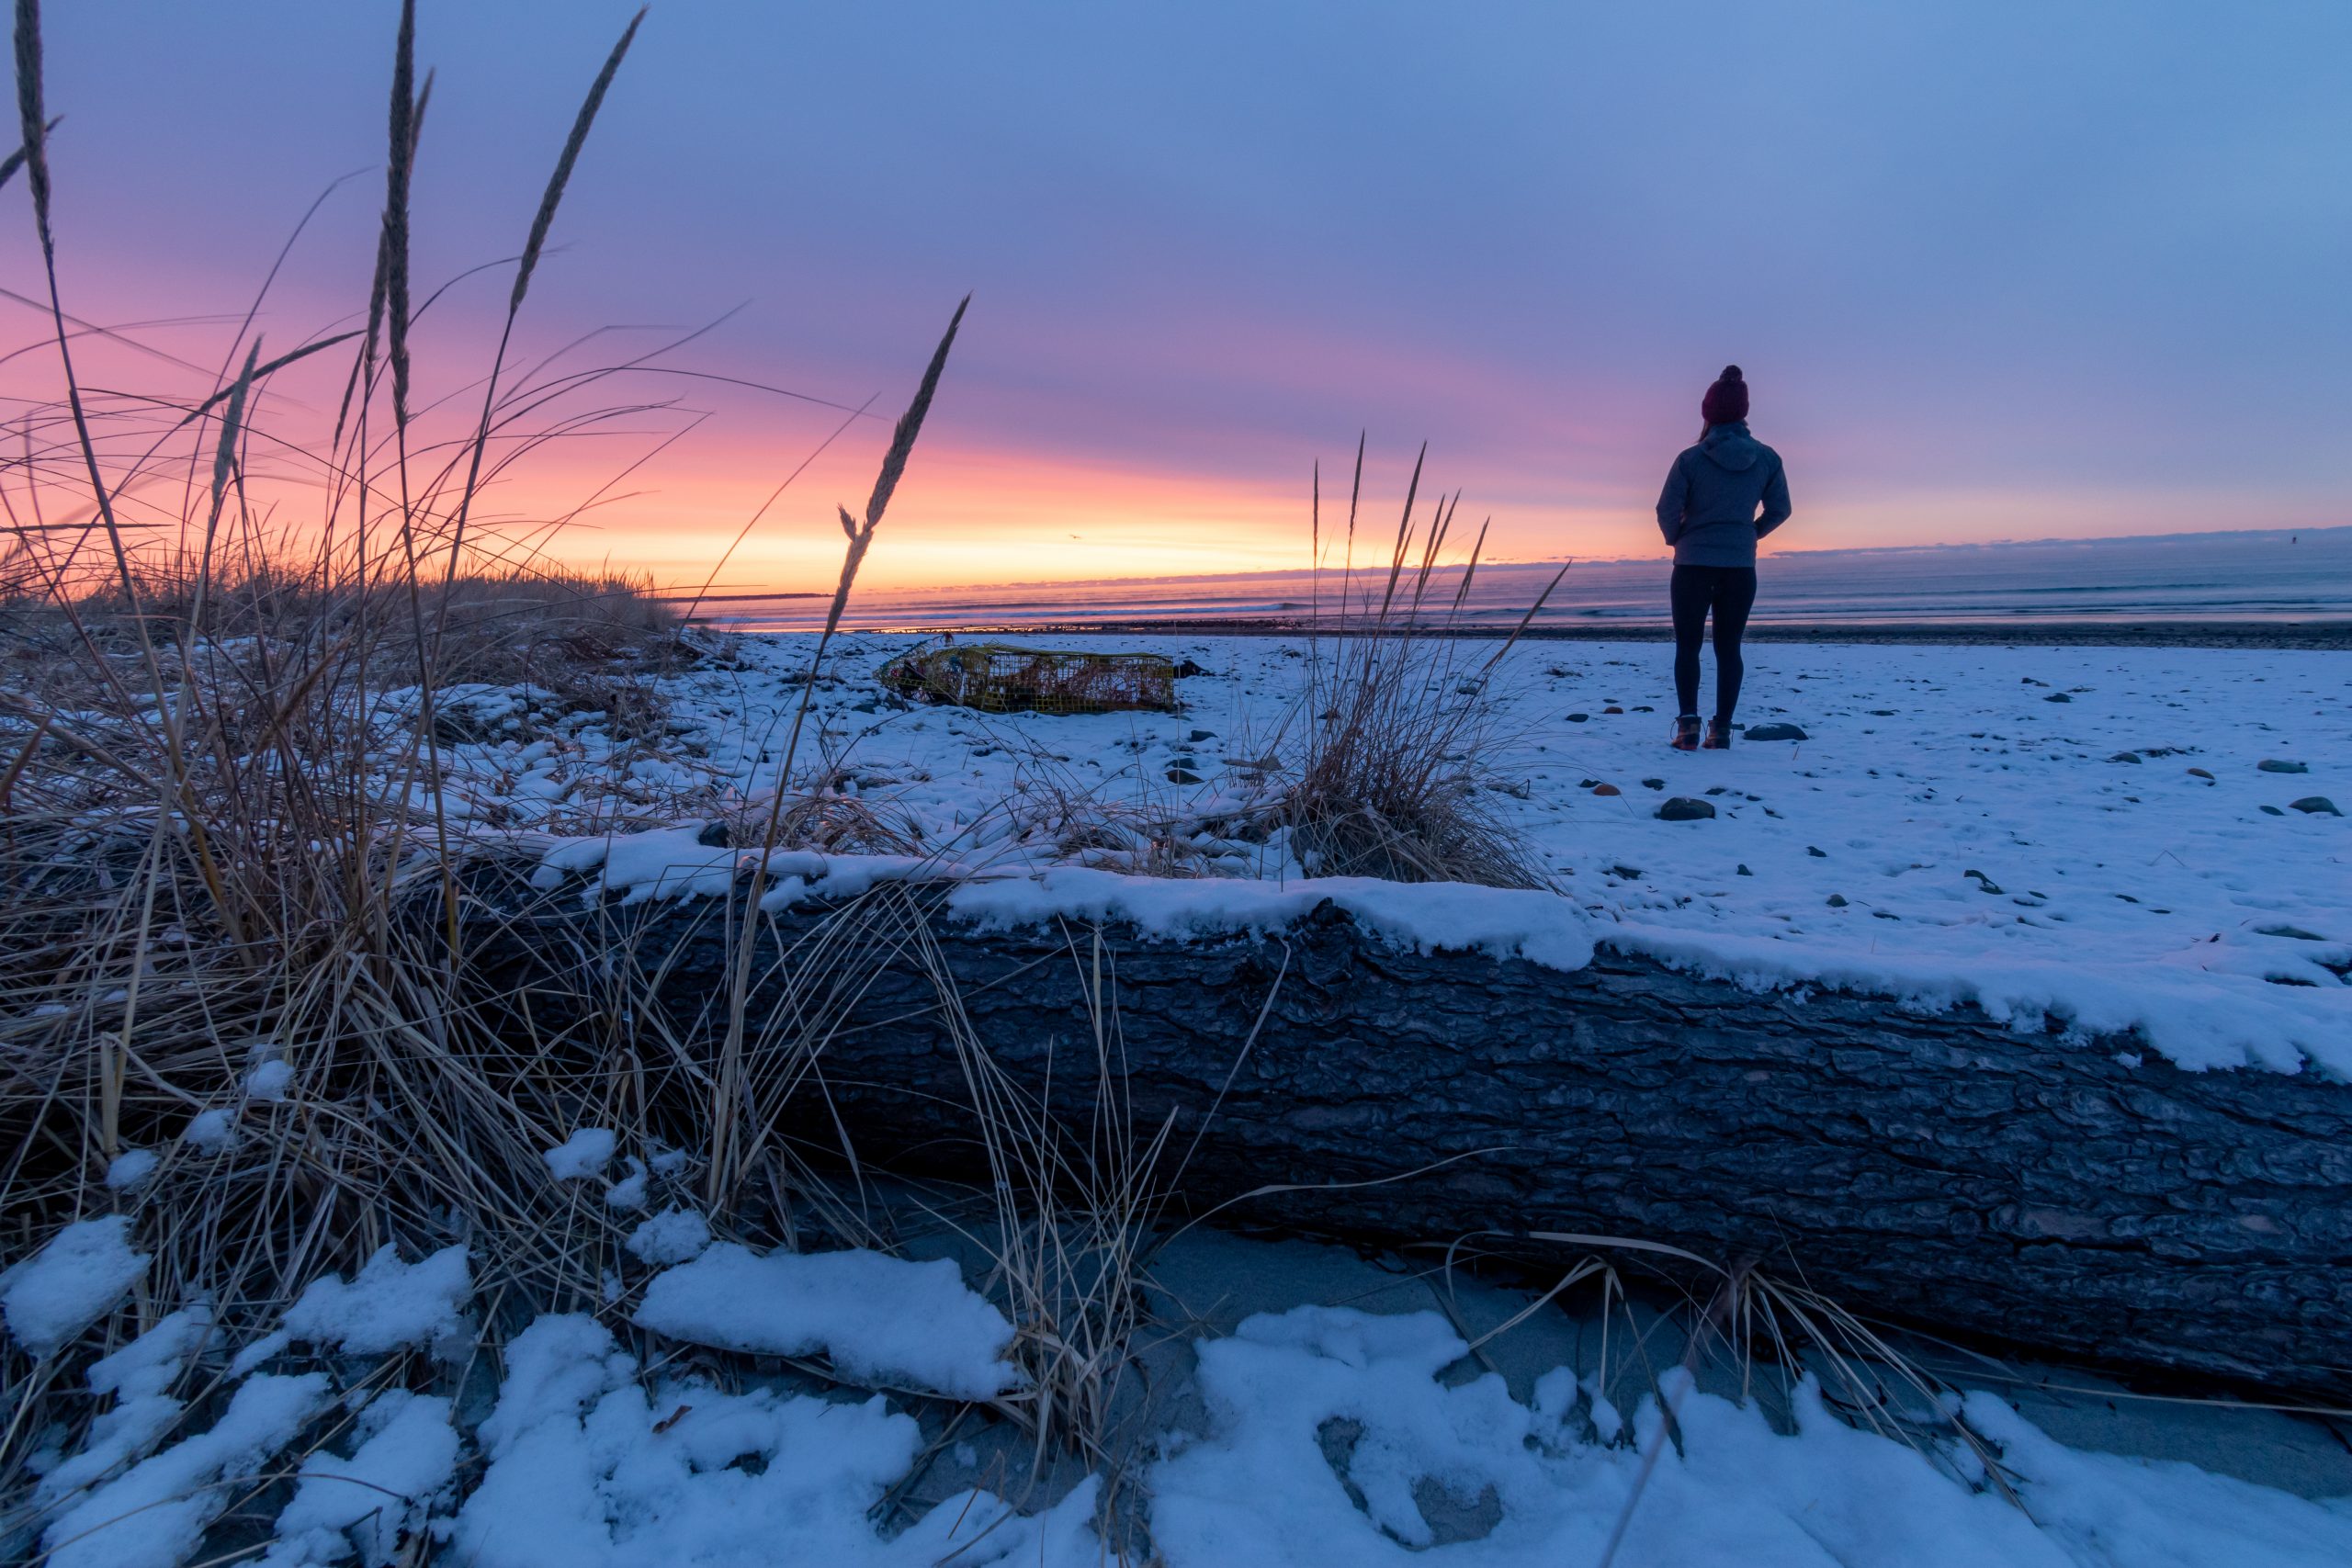 Sunrise on Drakes Island Beach with woman silhouette - Wells, Maine